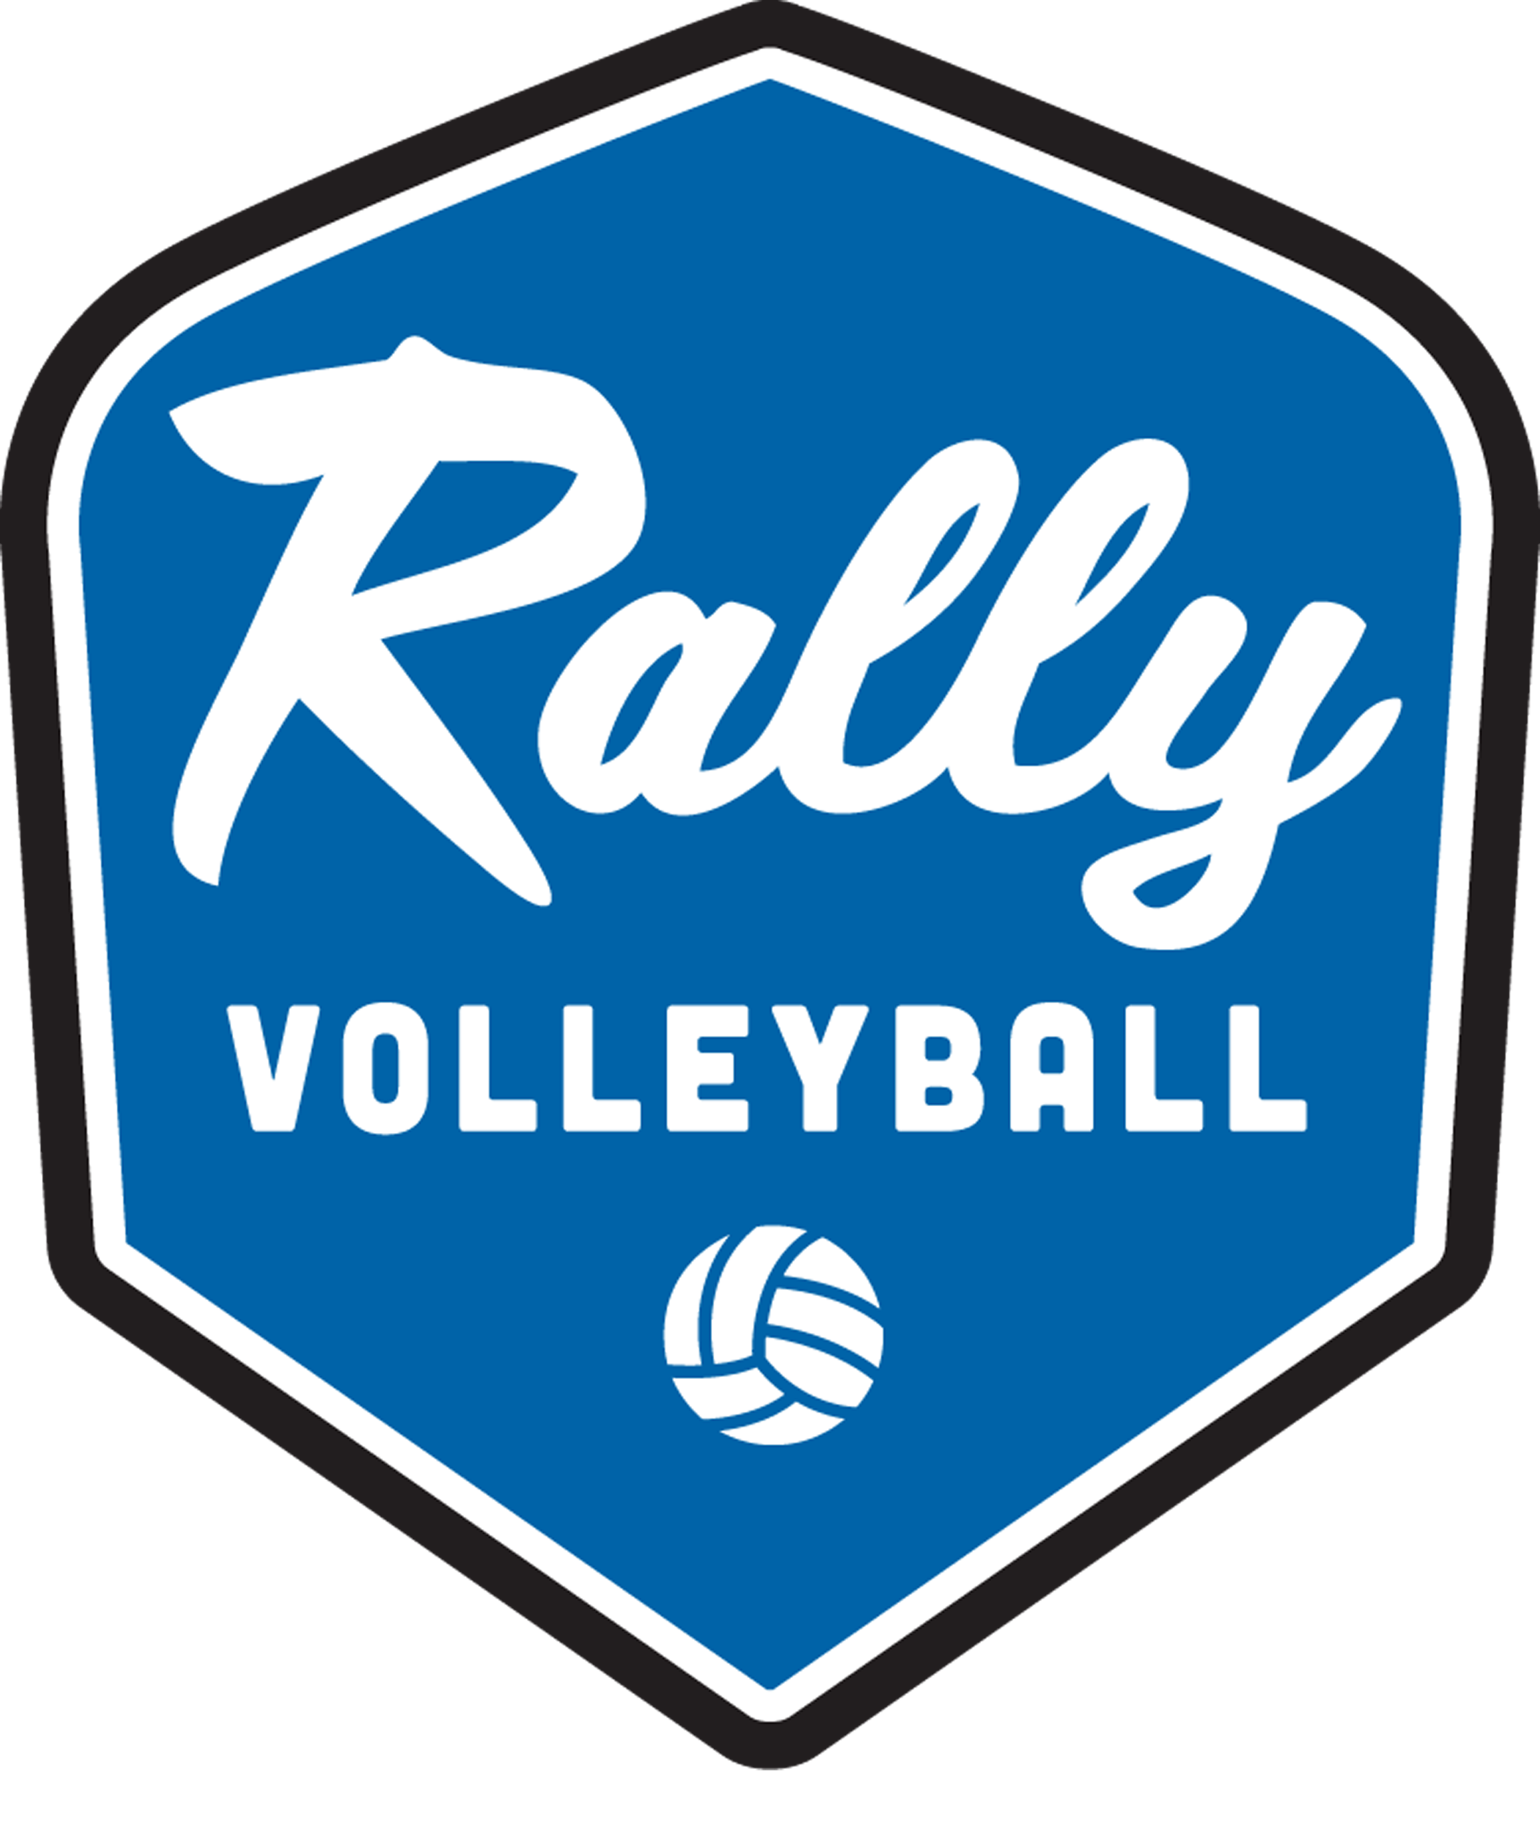 Rally Volleyball